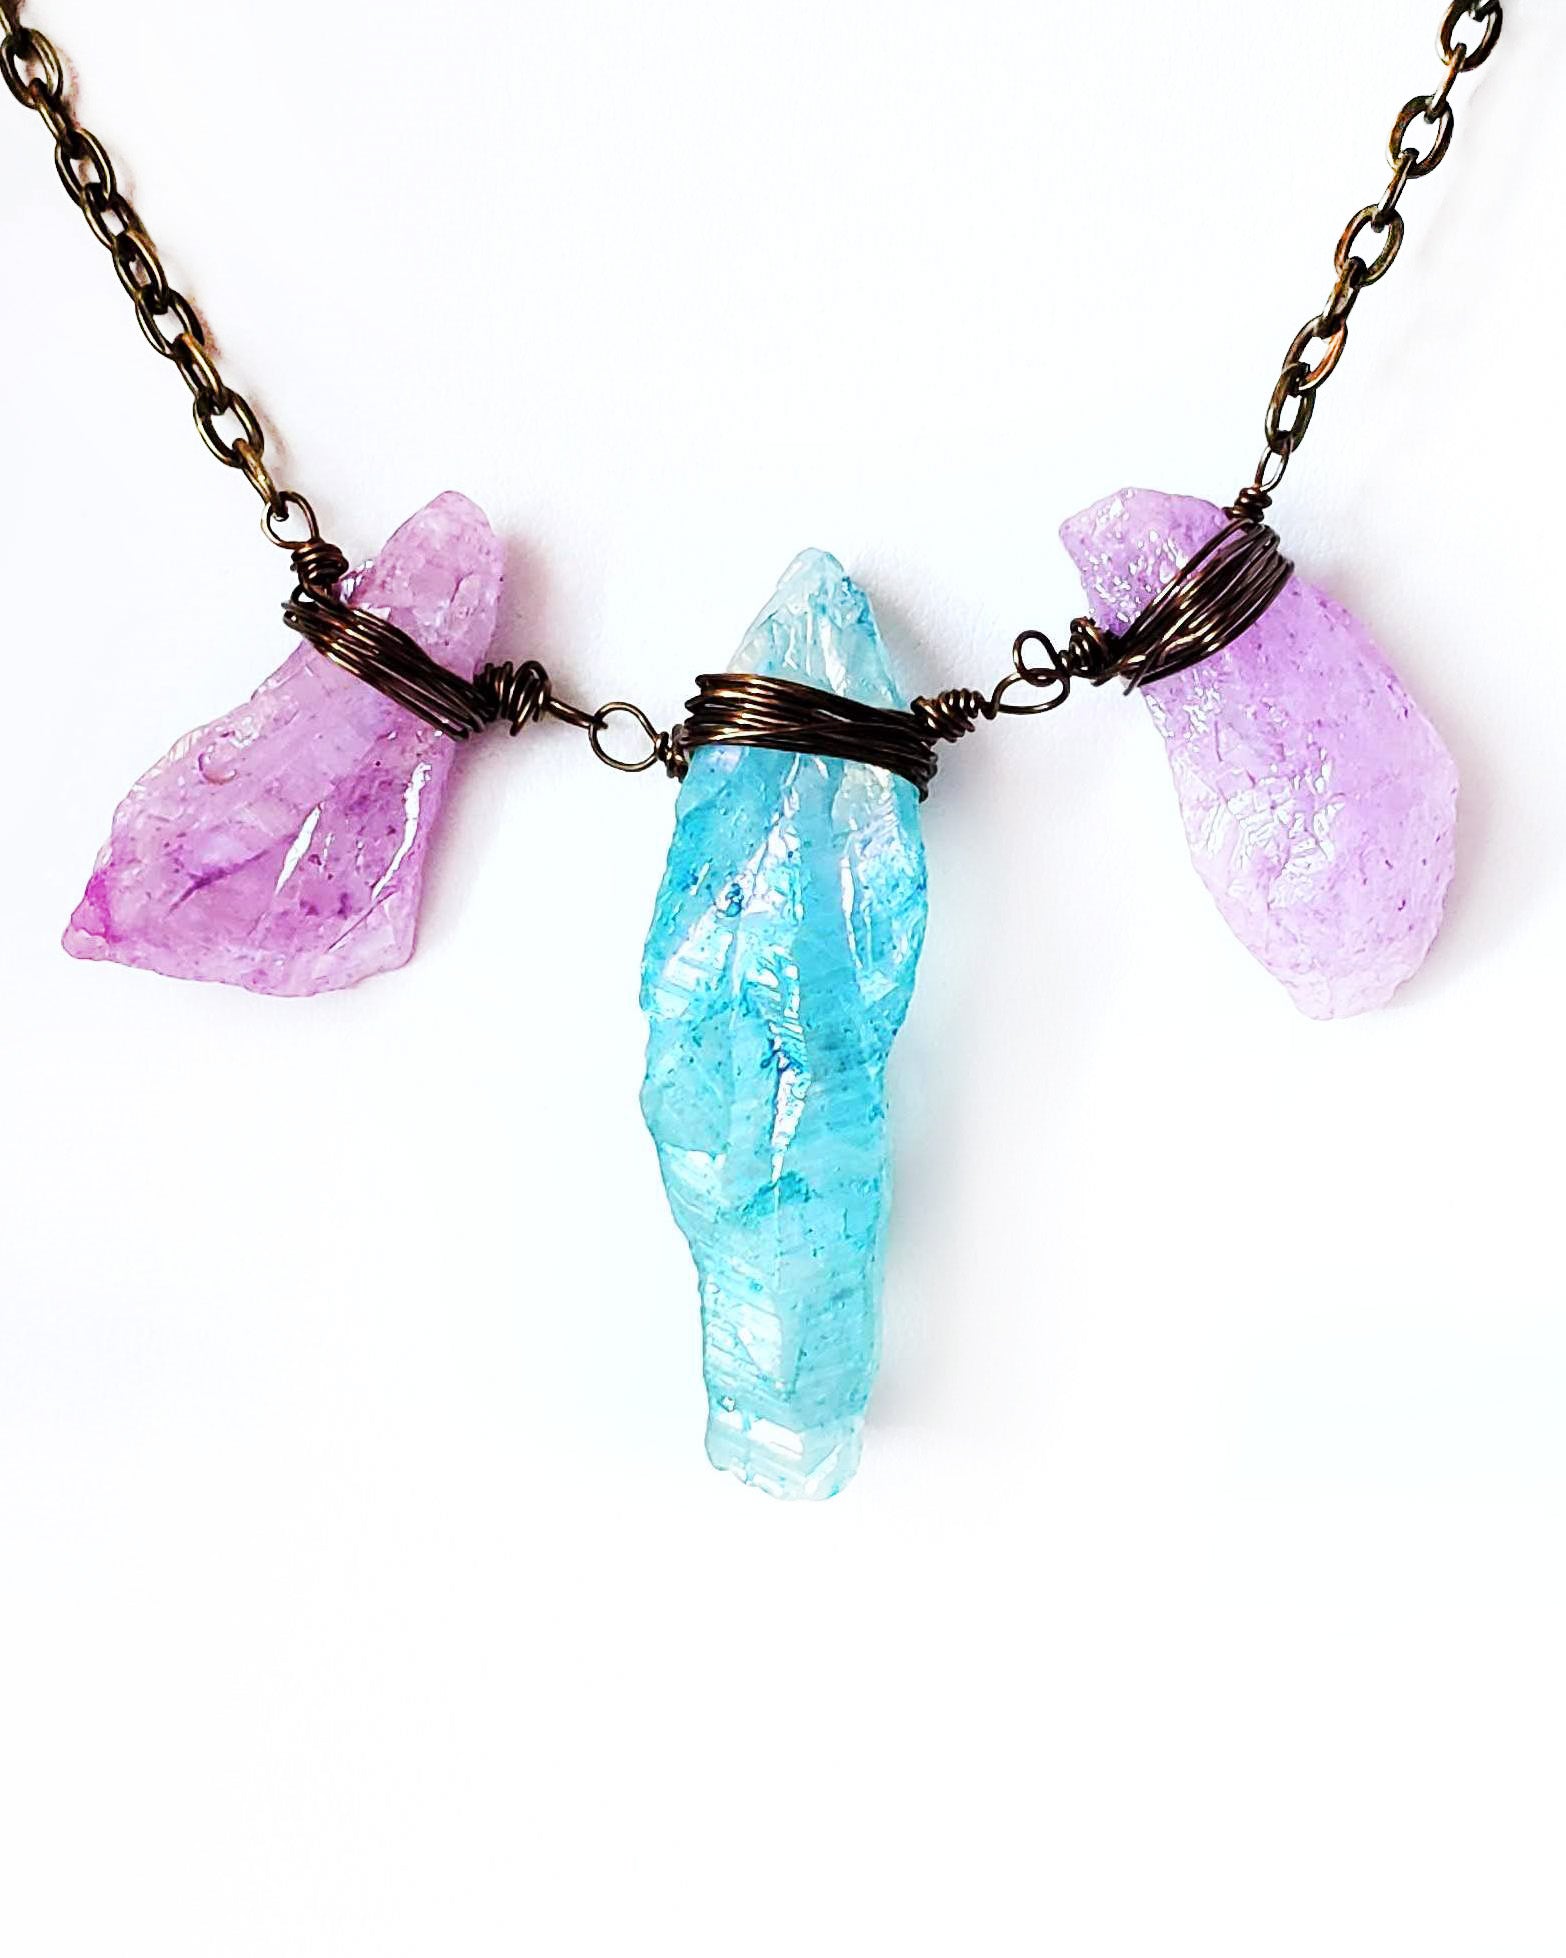 Lavender Blue Rainbow Quartz Crystal Necklace-Antiqued Brass Wire Wrapped Crystals on Chain displayed on white background 